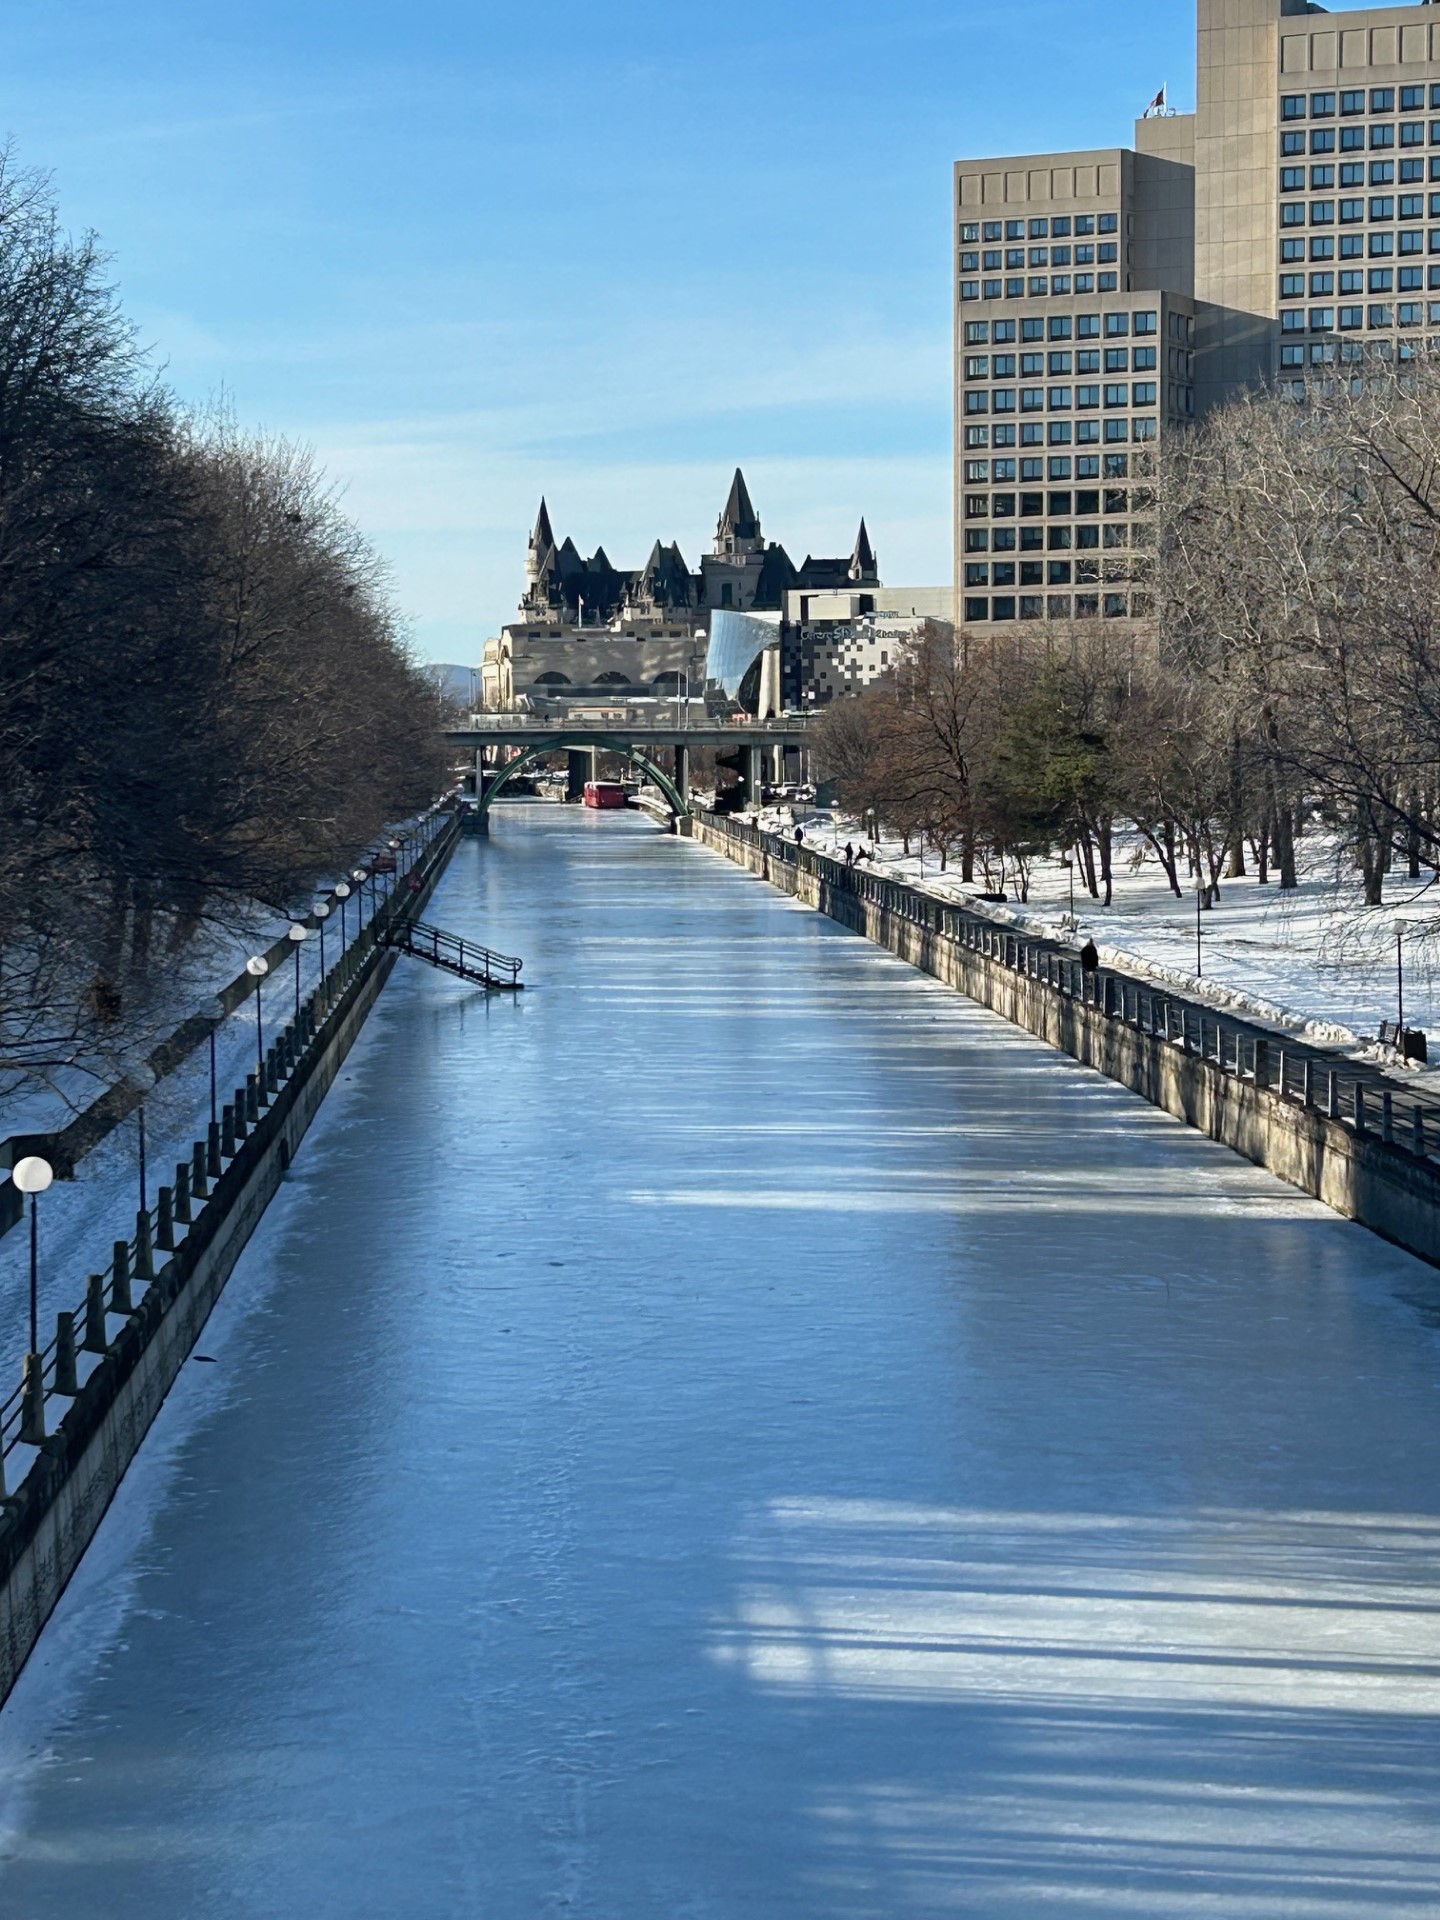 Rideau Canal with ice looking good and no one skating. Parliament in the background.